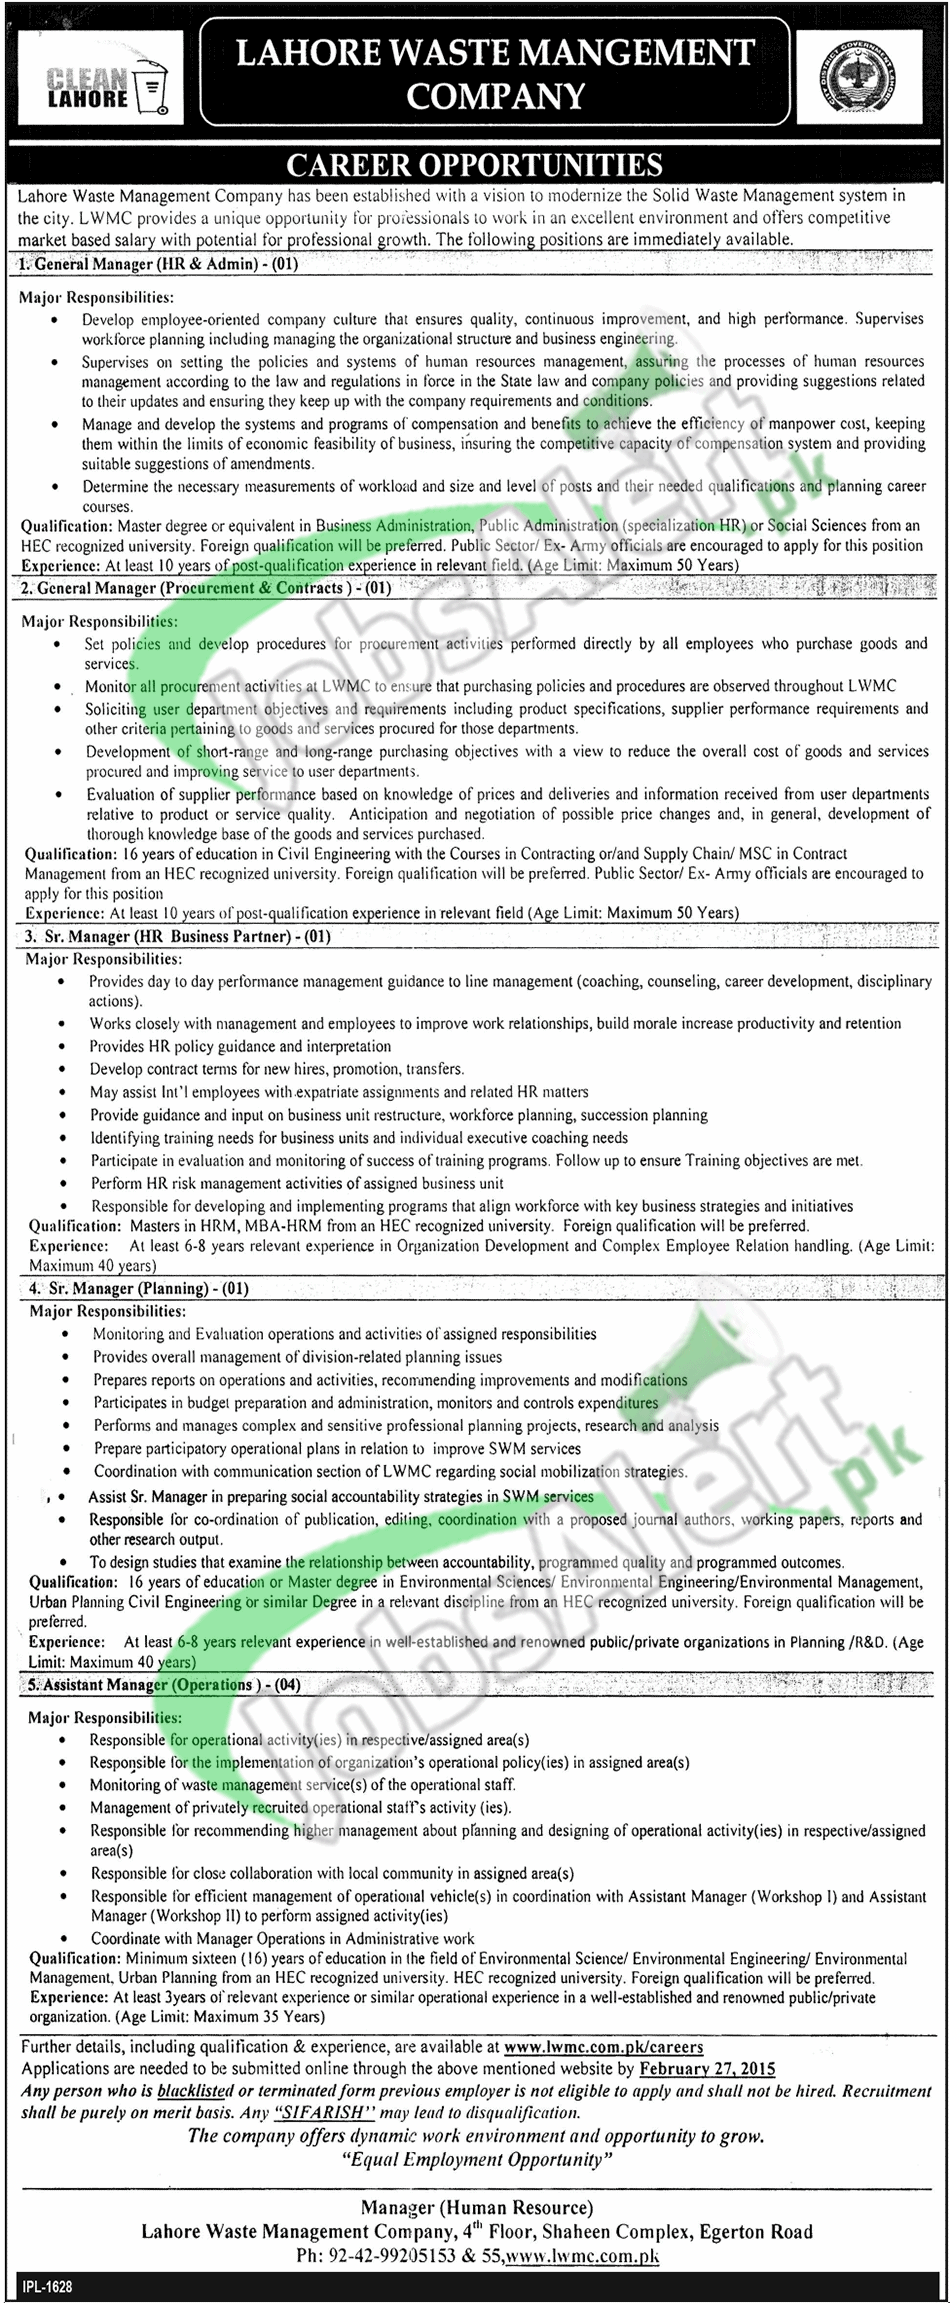 Lahore Waste Management Company Jobs